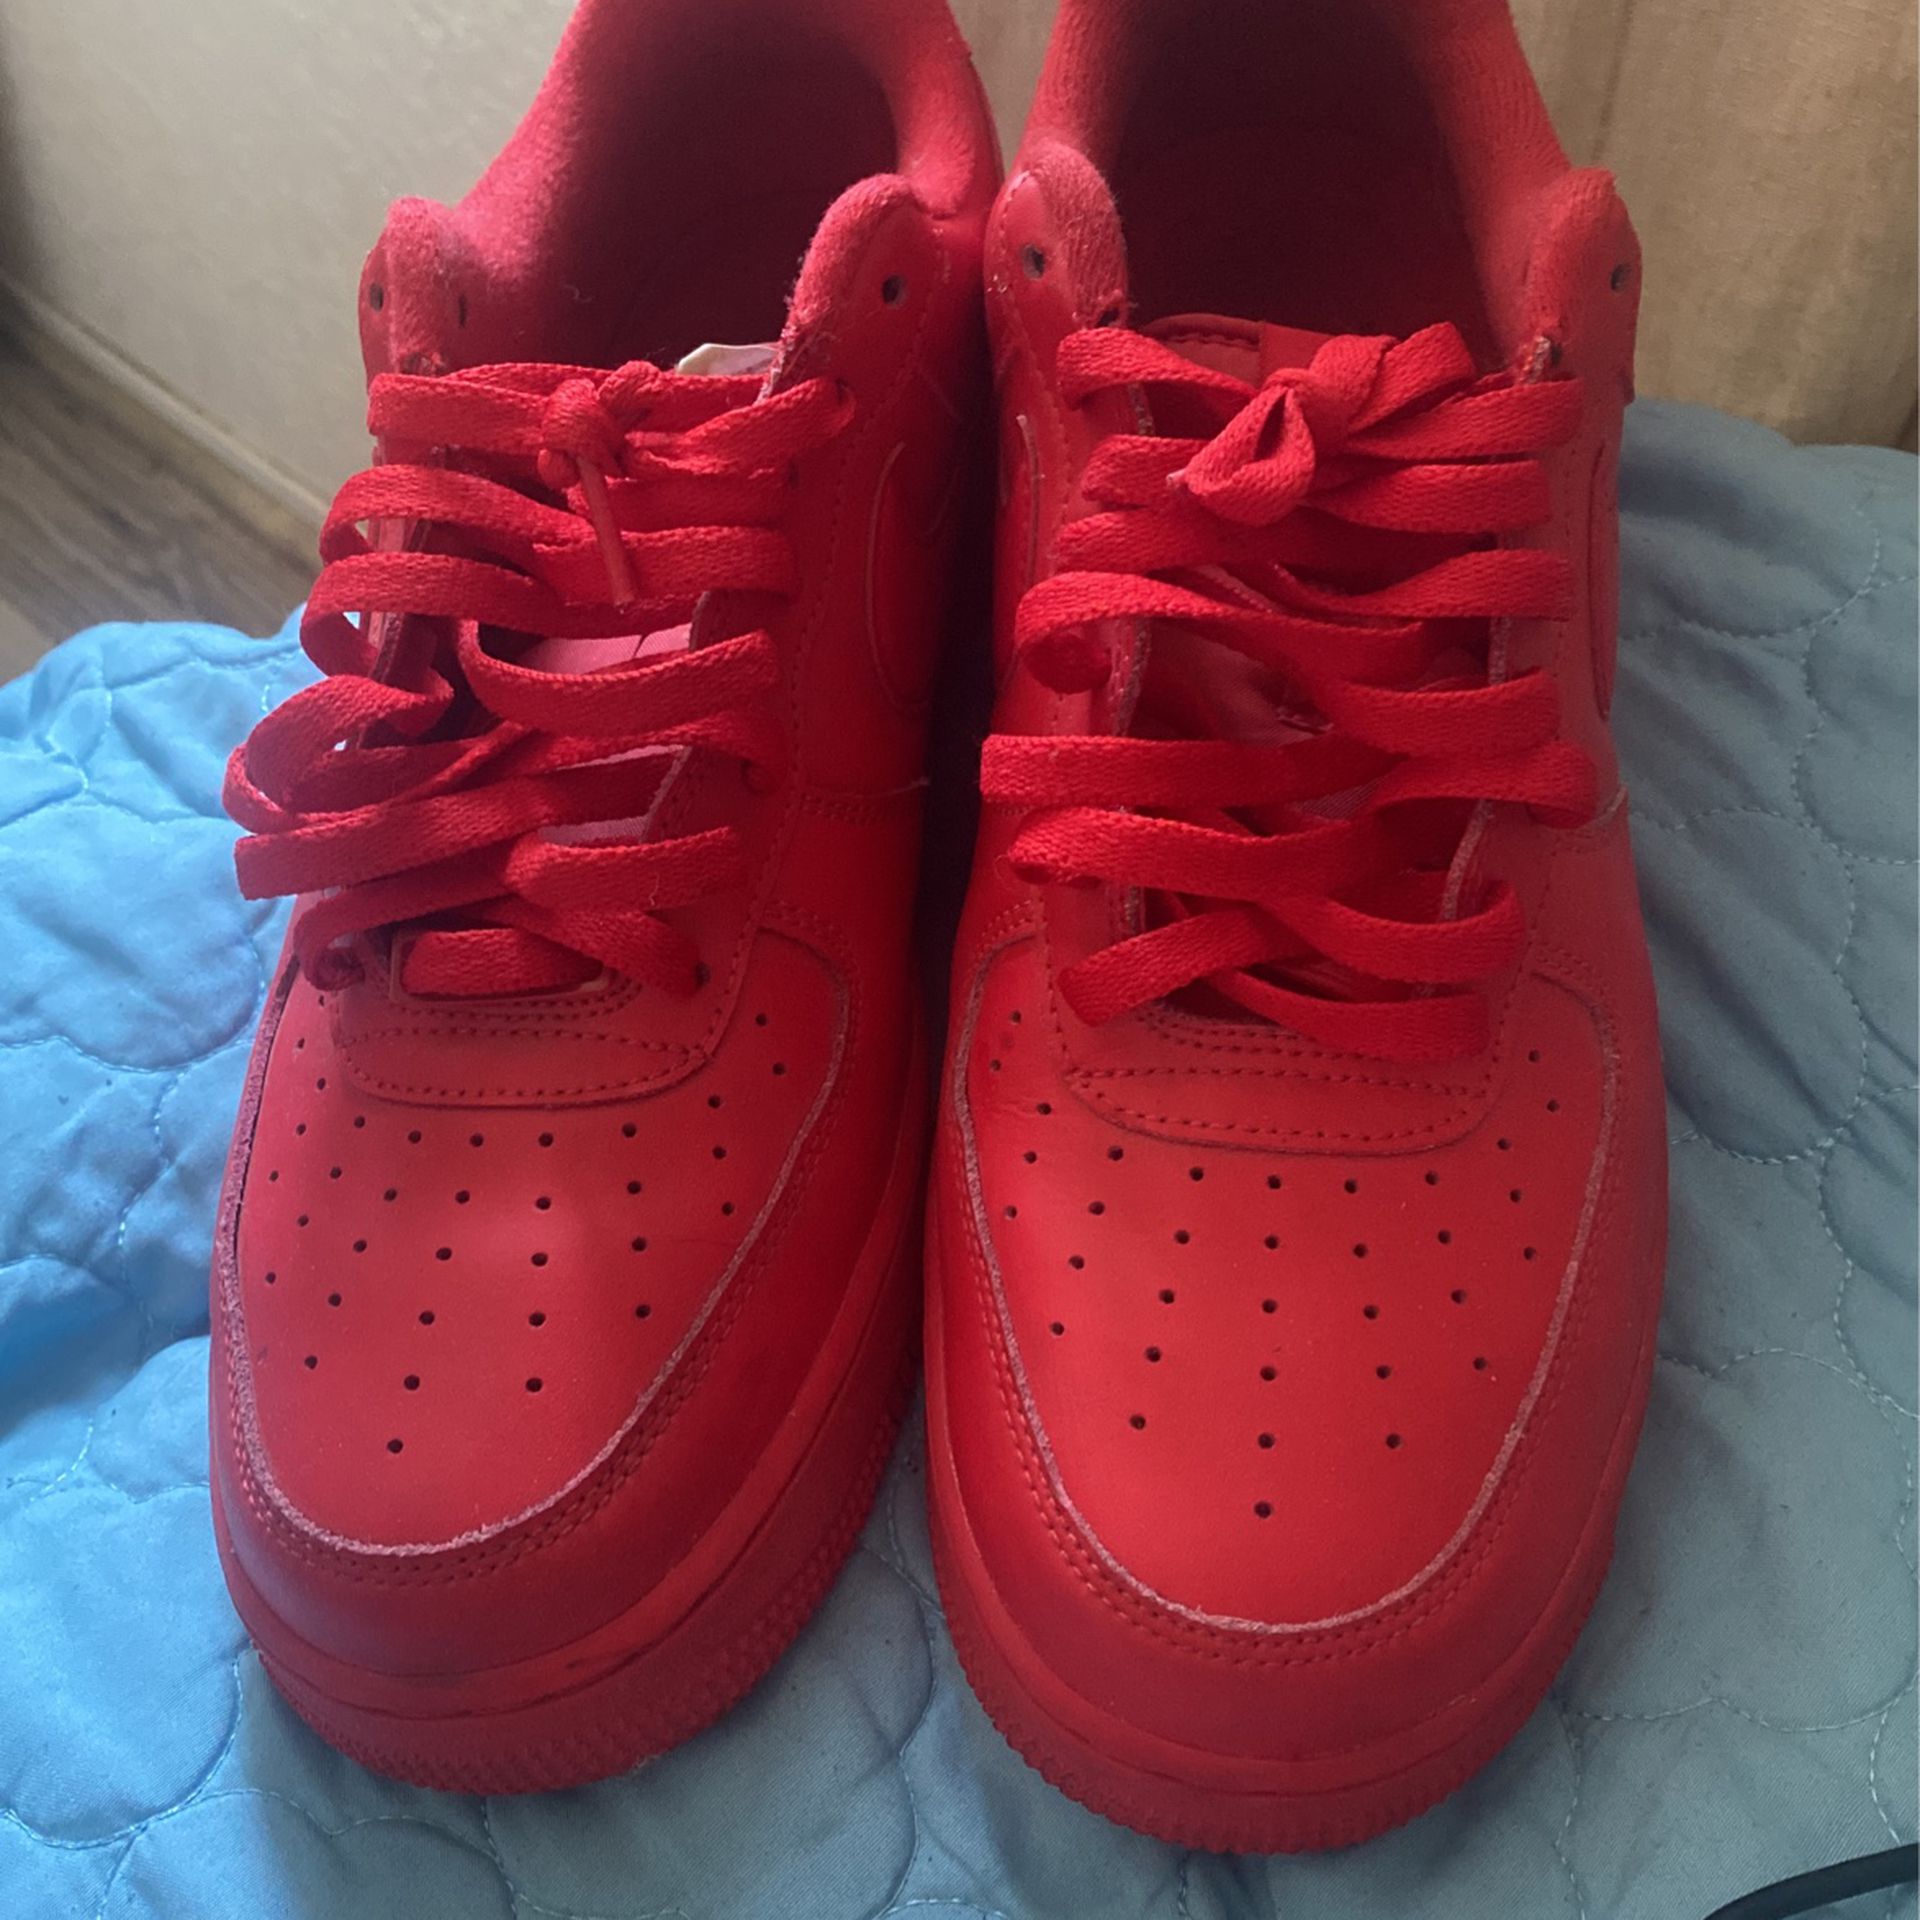 Red Air Force Ones.